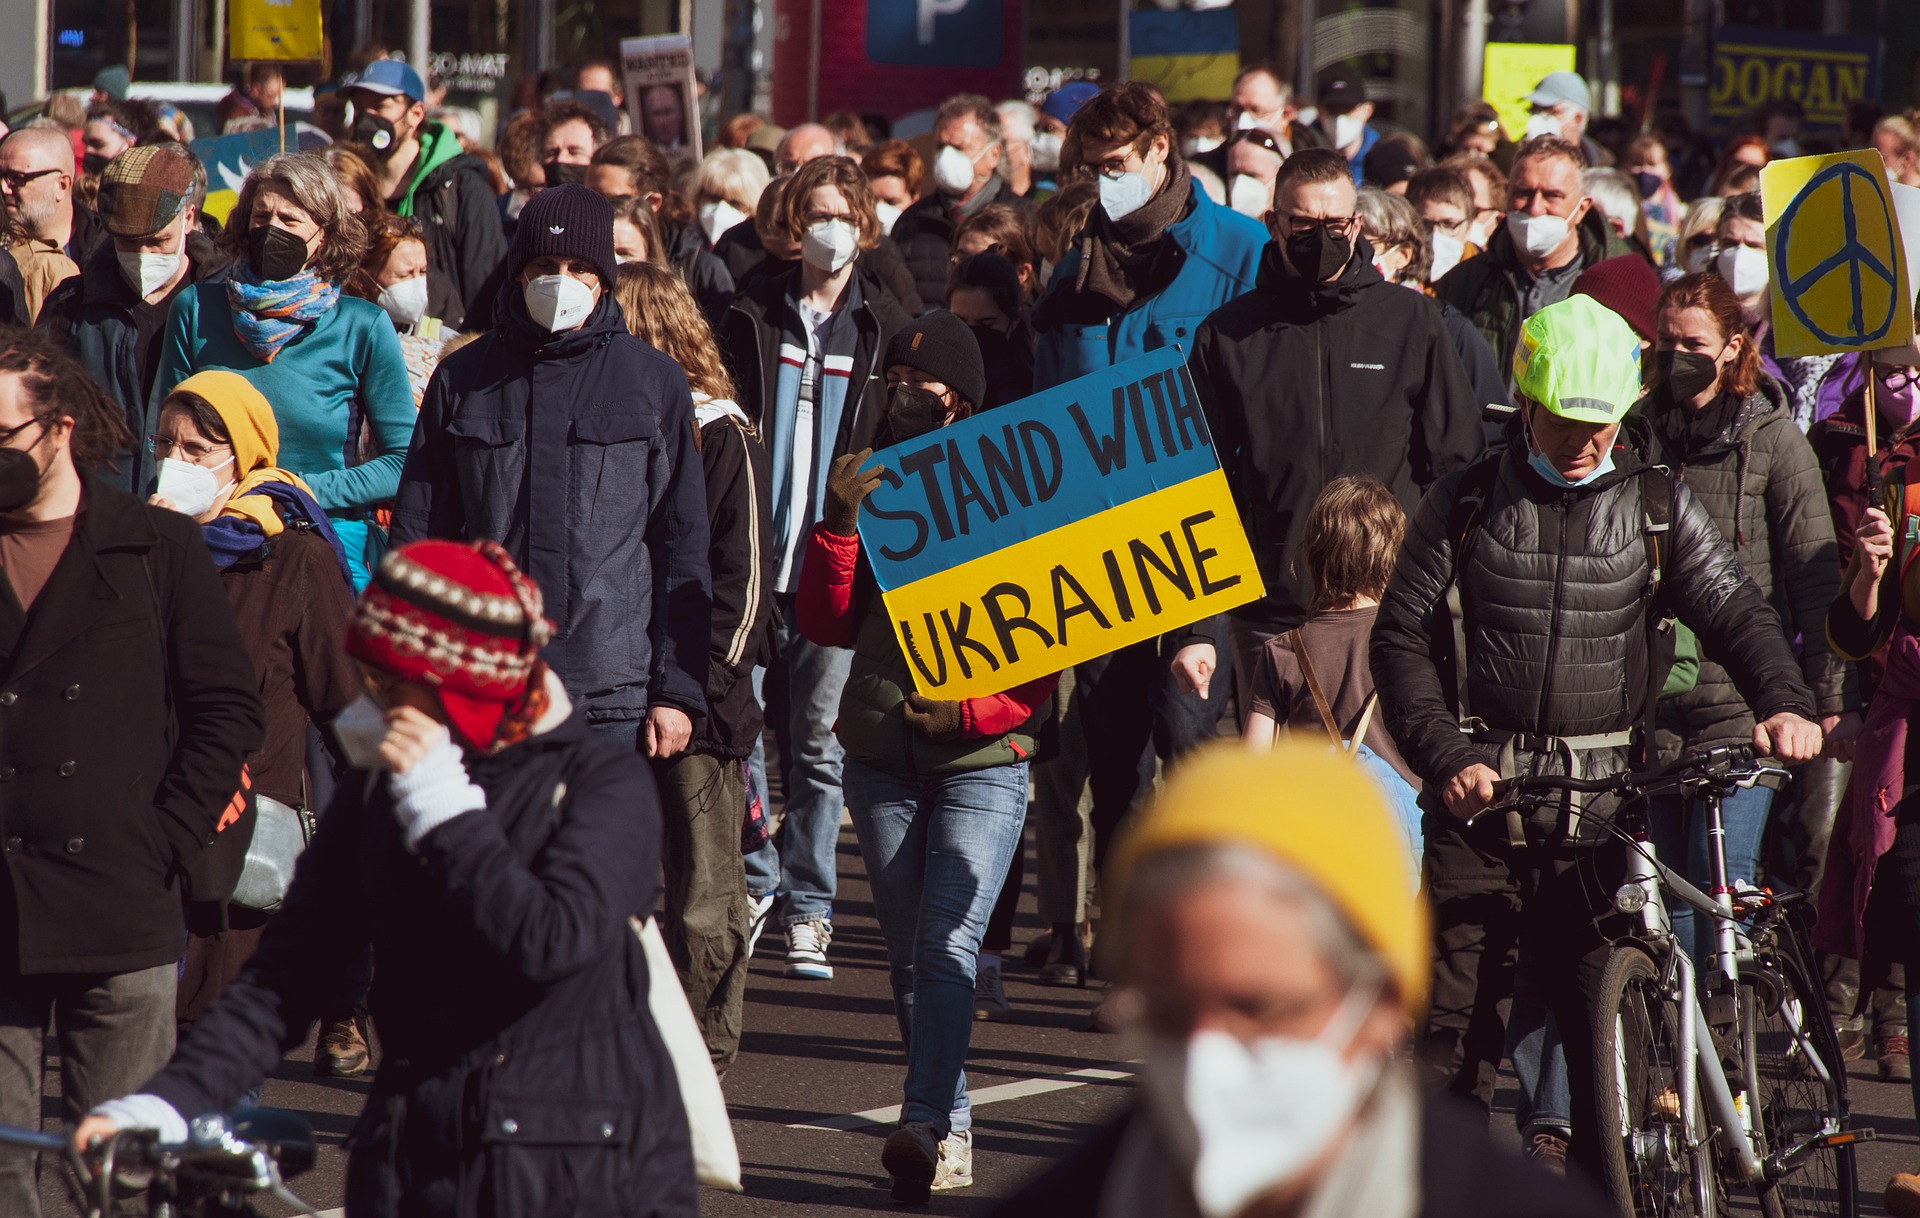 Protest in support of Ukraine.